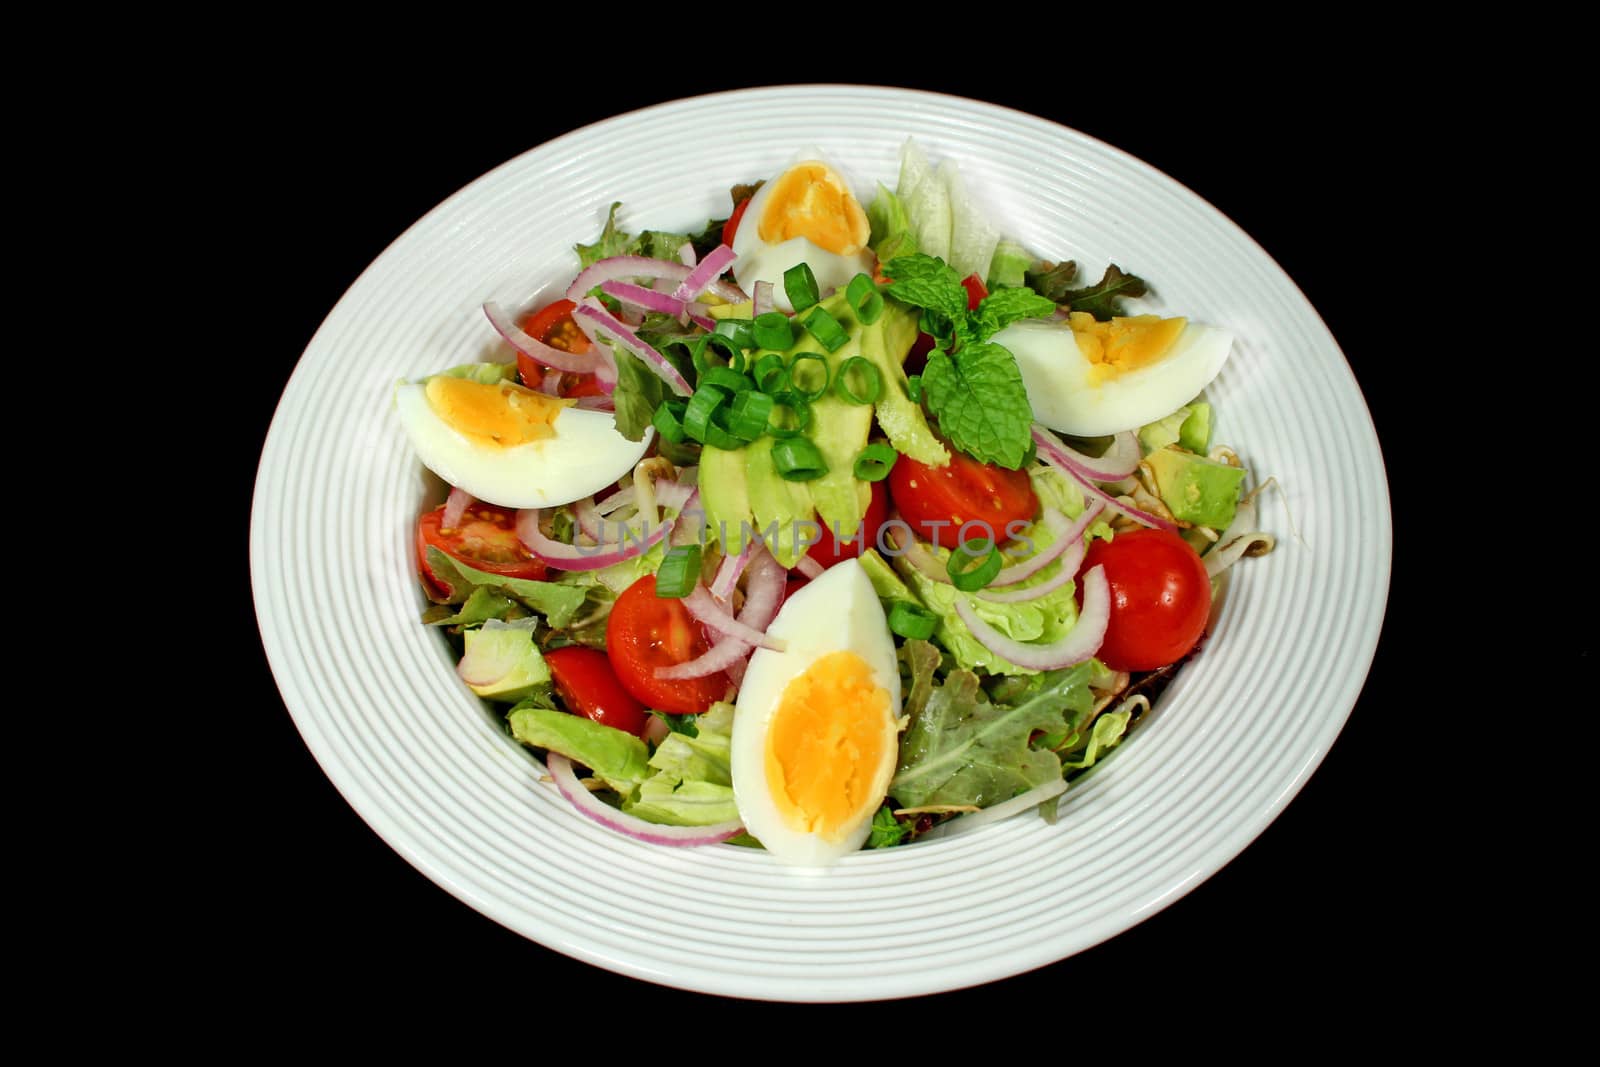 Delightful egg and avocado salad ready to serve.